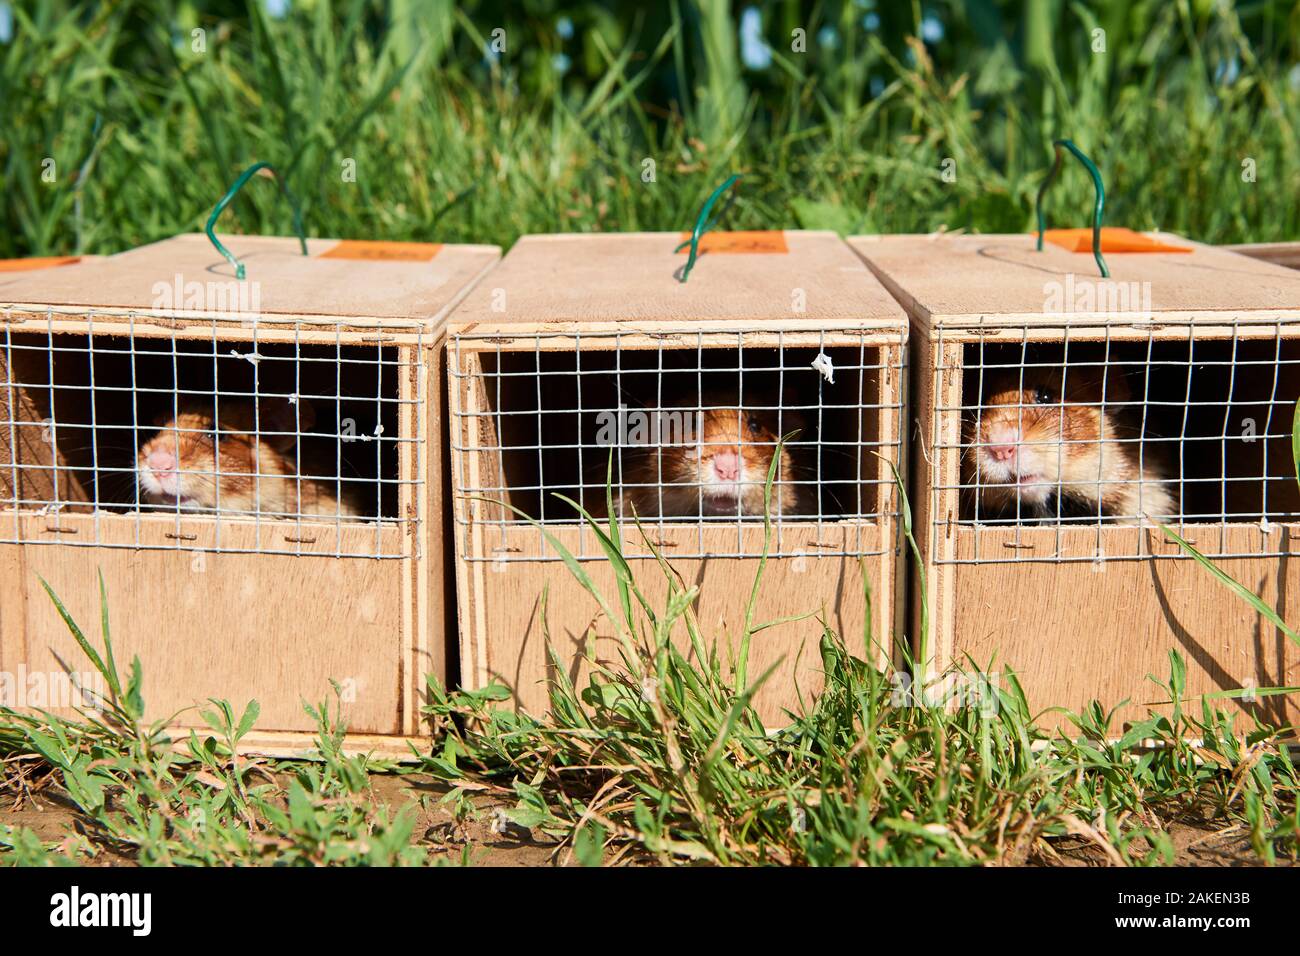 Common Hamsters (Cricetus cricetus) in cages ready for release in a wheat field. Geispolsheim, Alsace, France, June 2018 Stock Photo